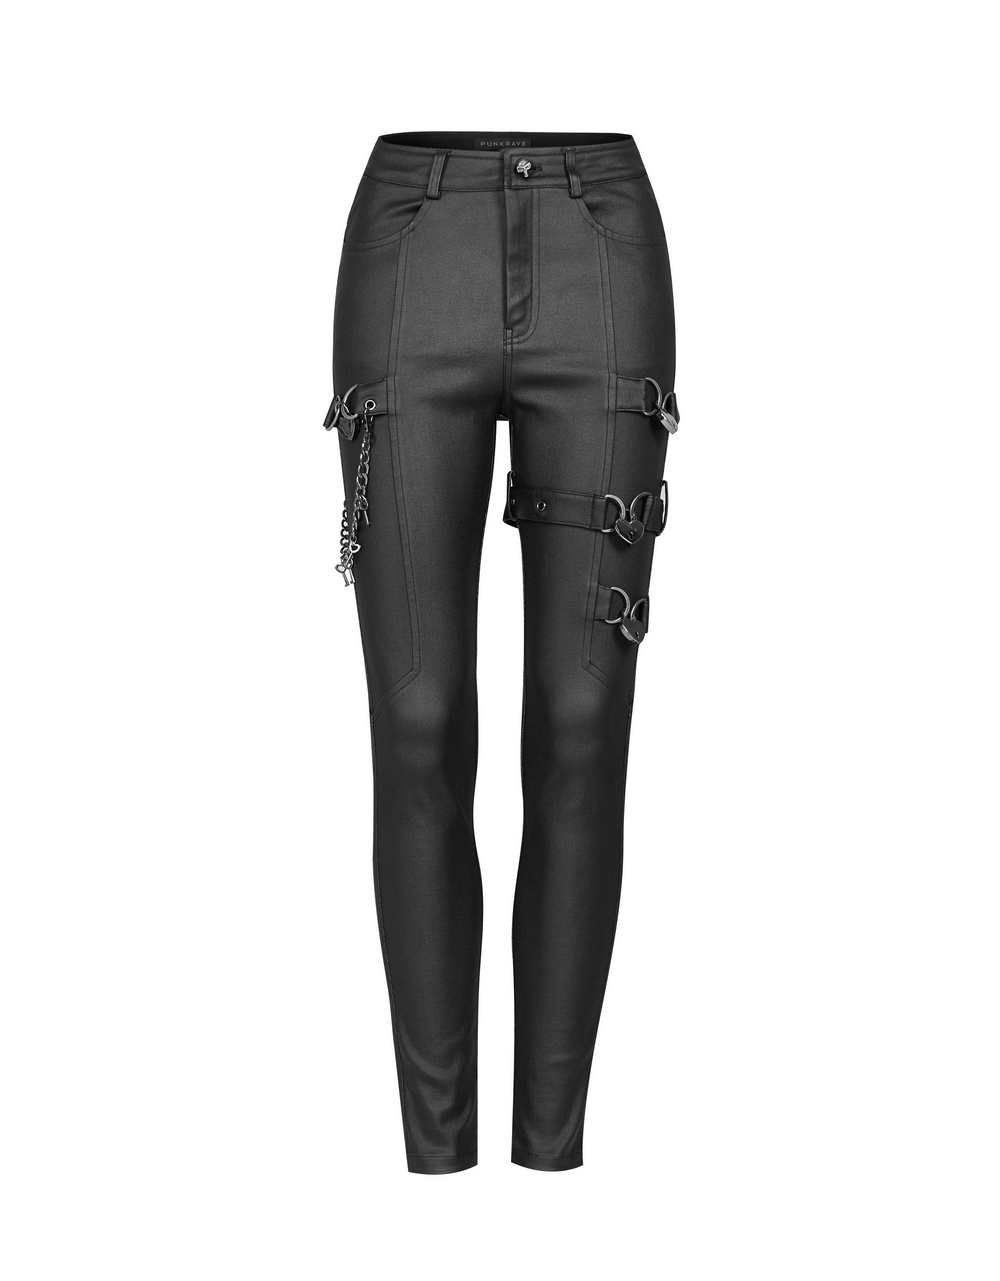 Punk-Style PU Leather Pants with Chain Accents